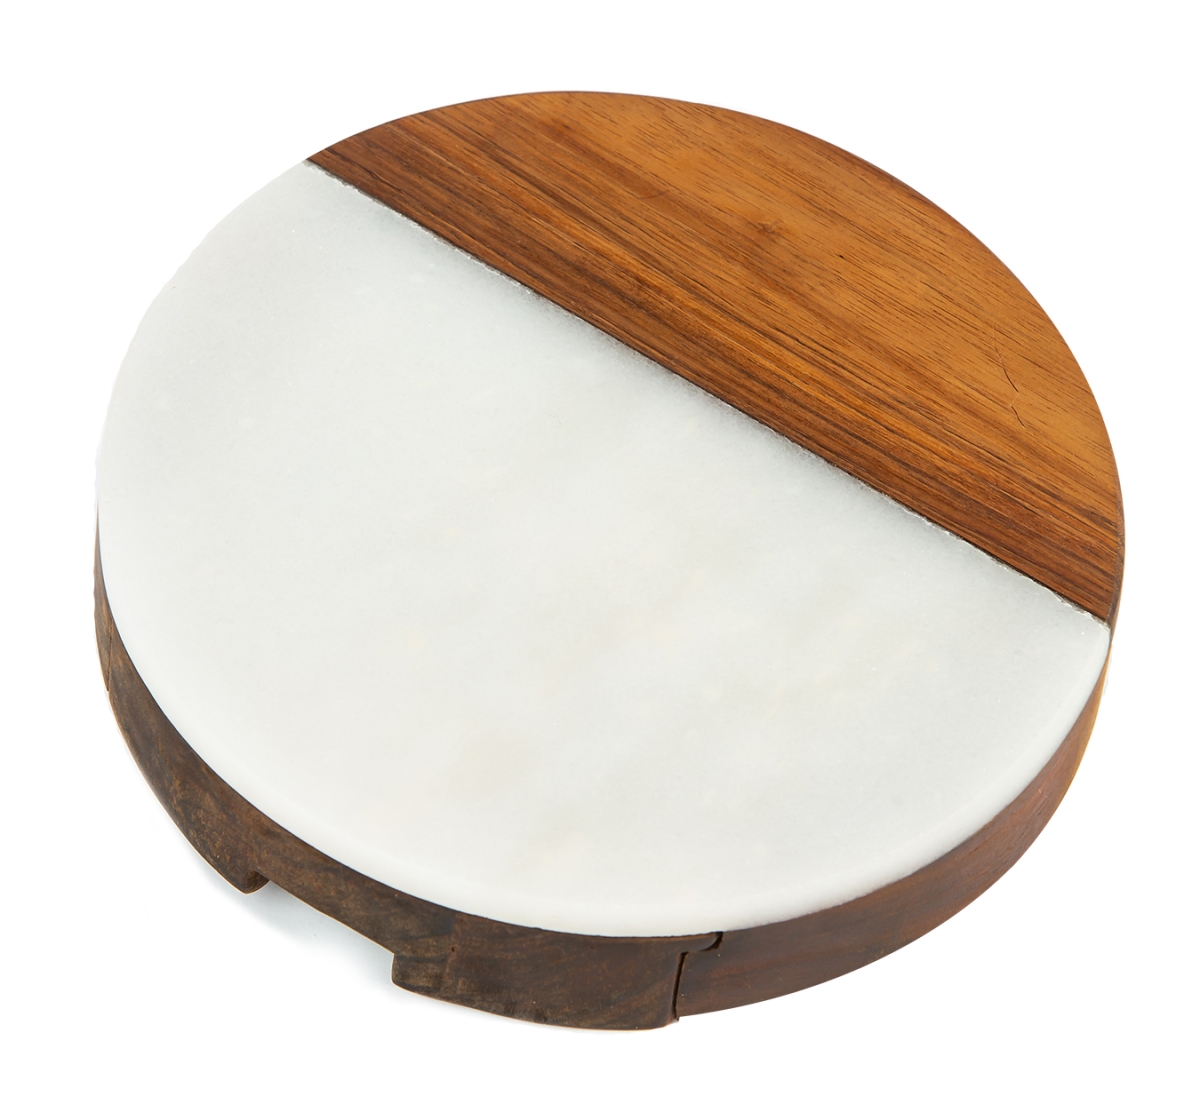 Psm-559wh Winslow Marble Cheese Tray - White